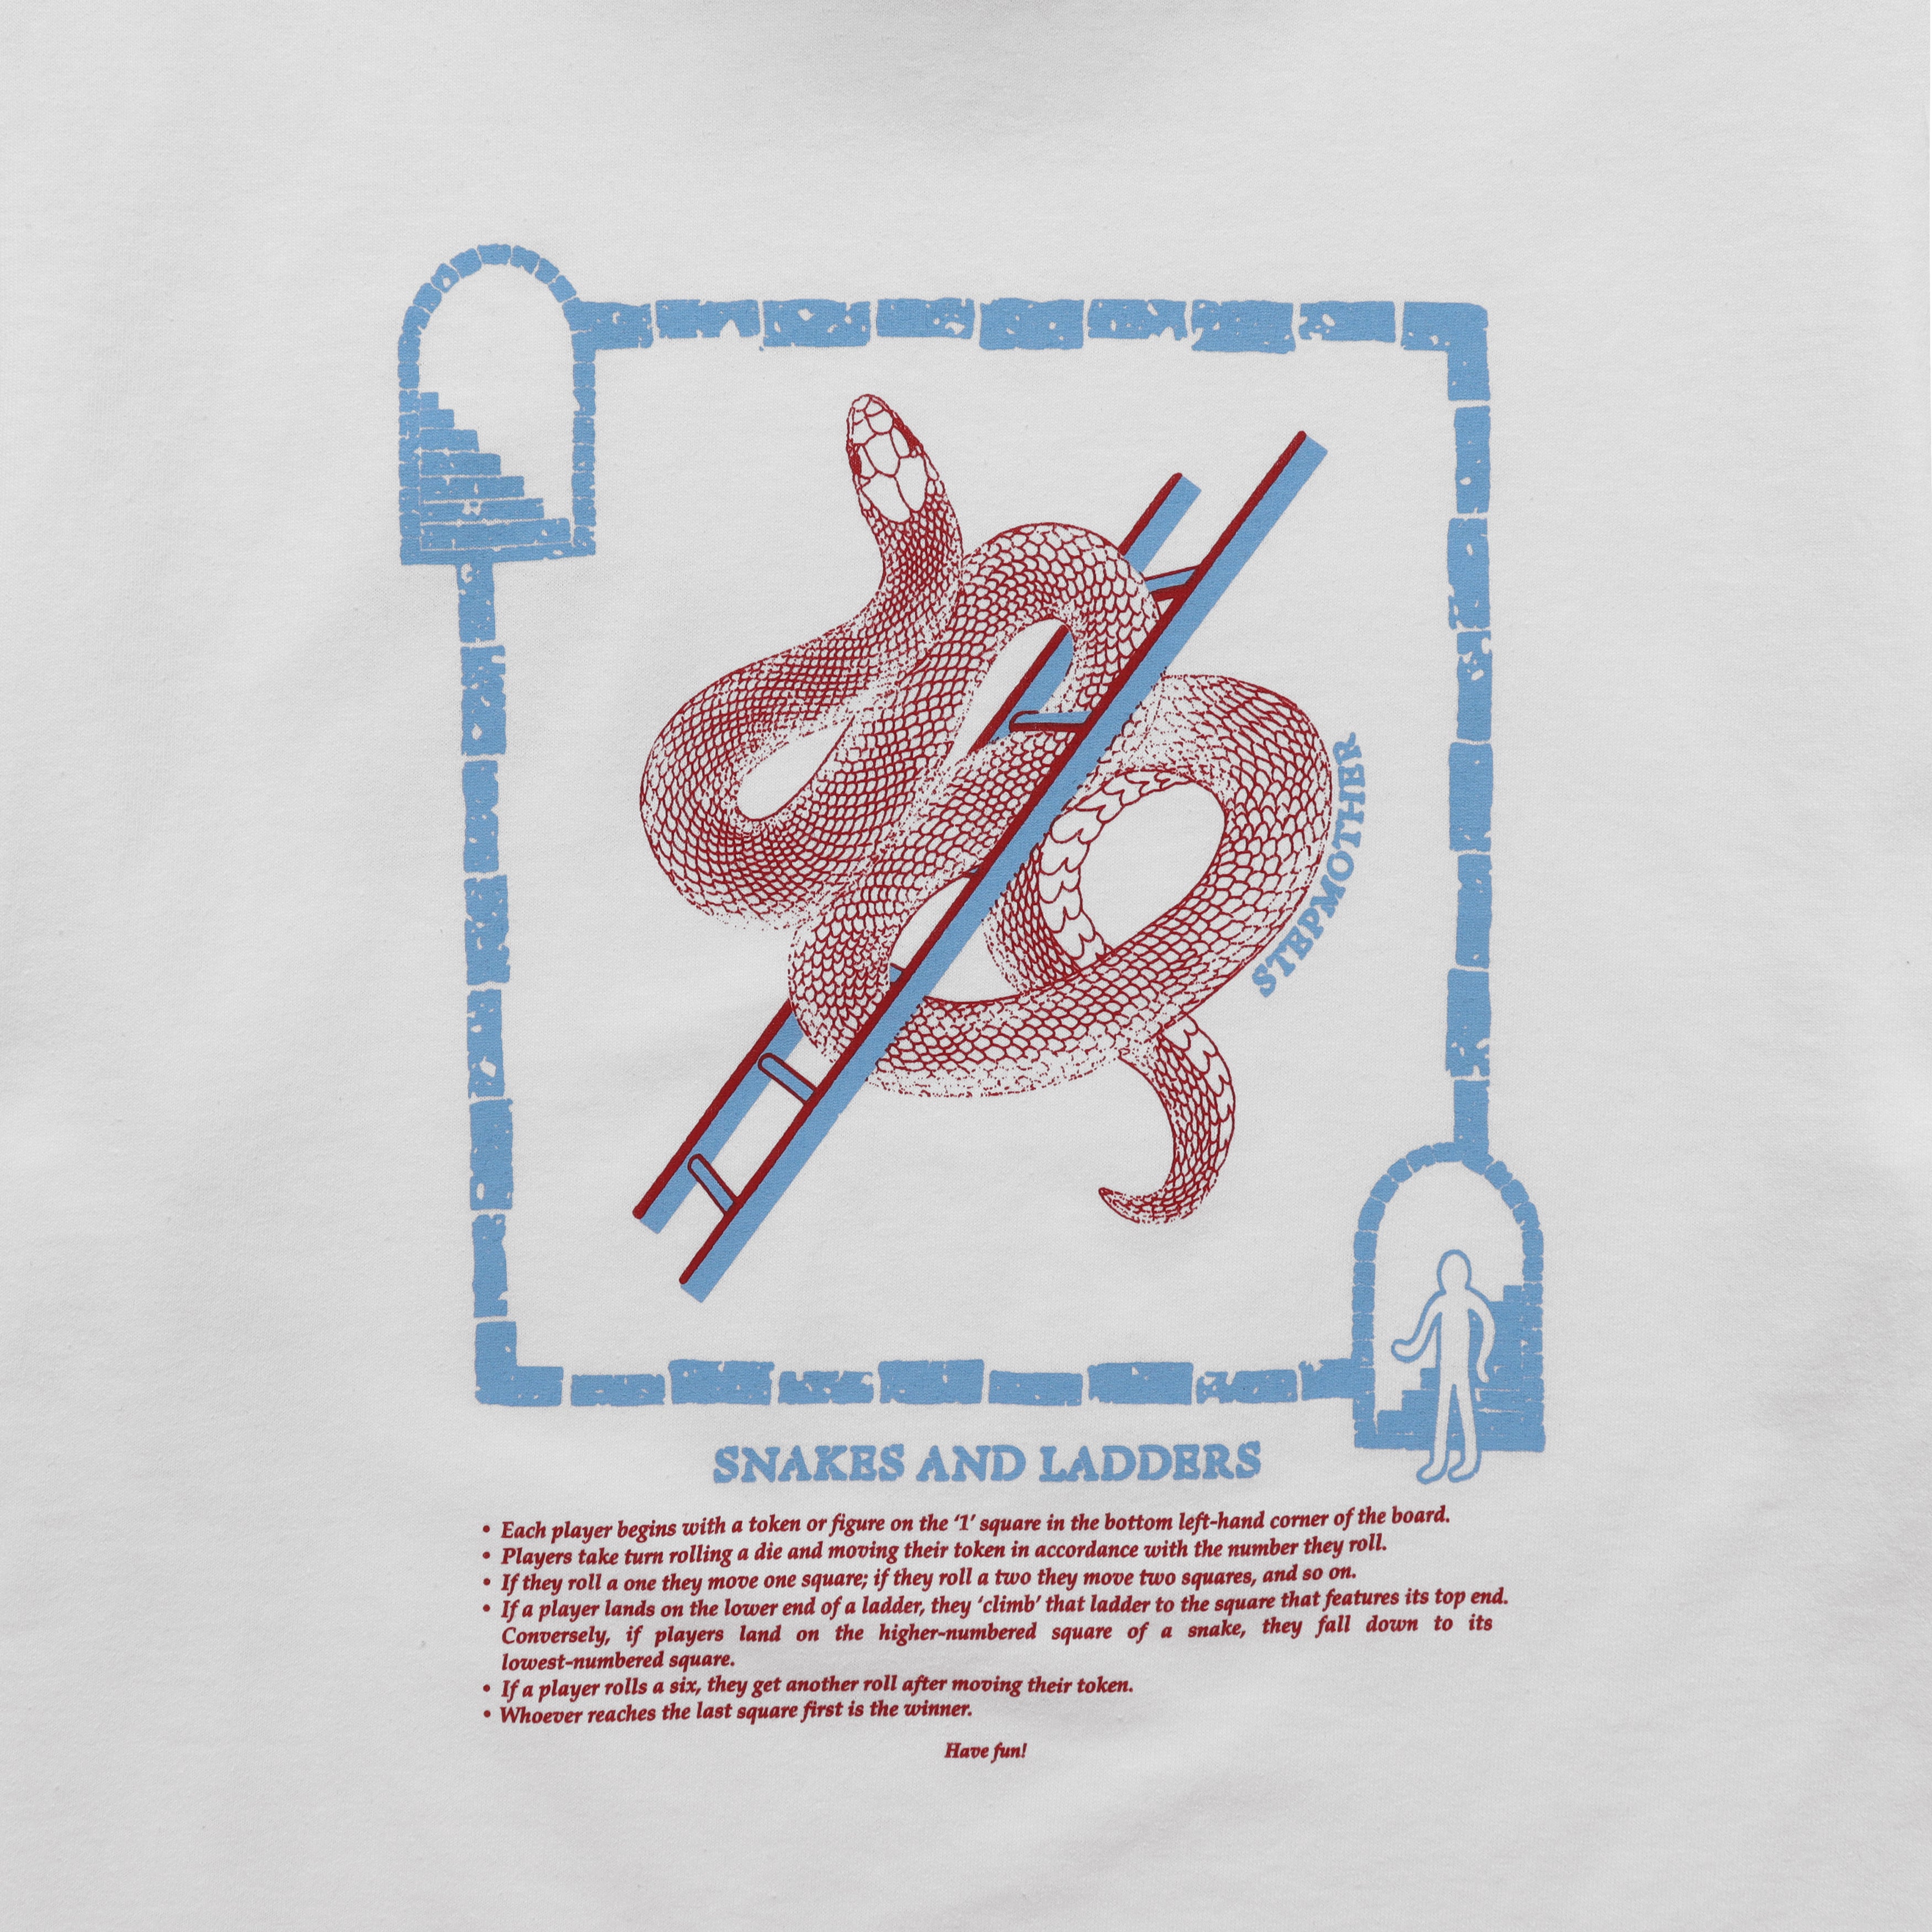 Snakes and Ladders Tshirt - White